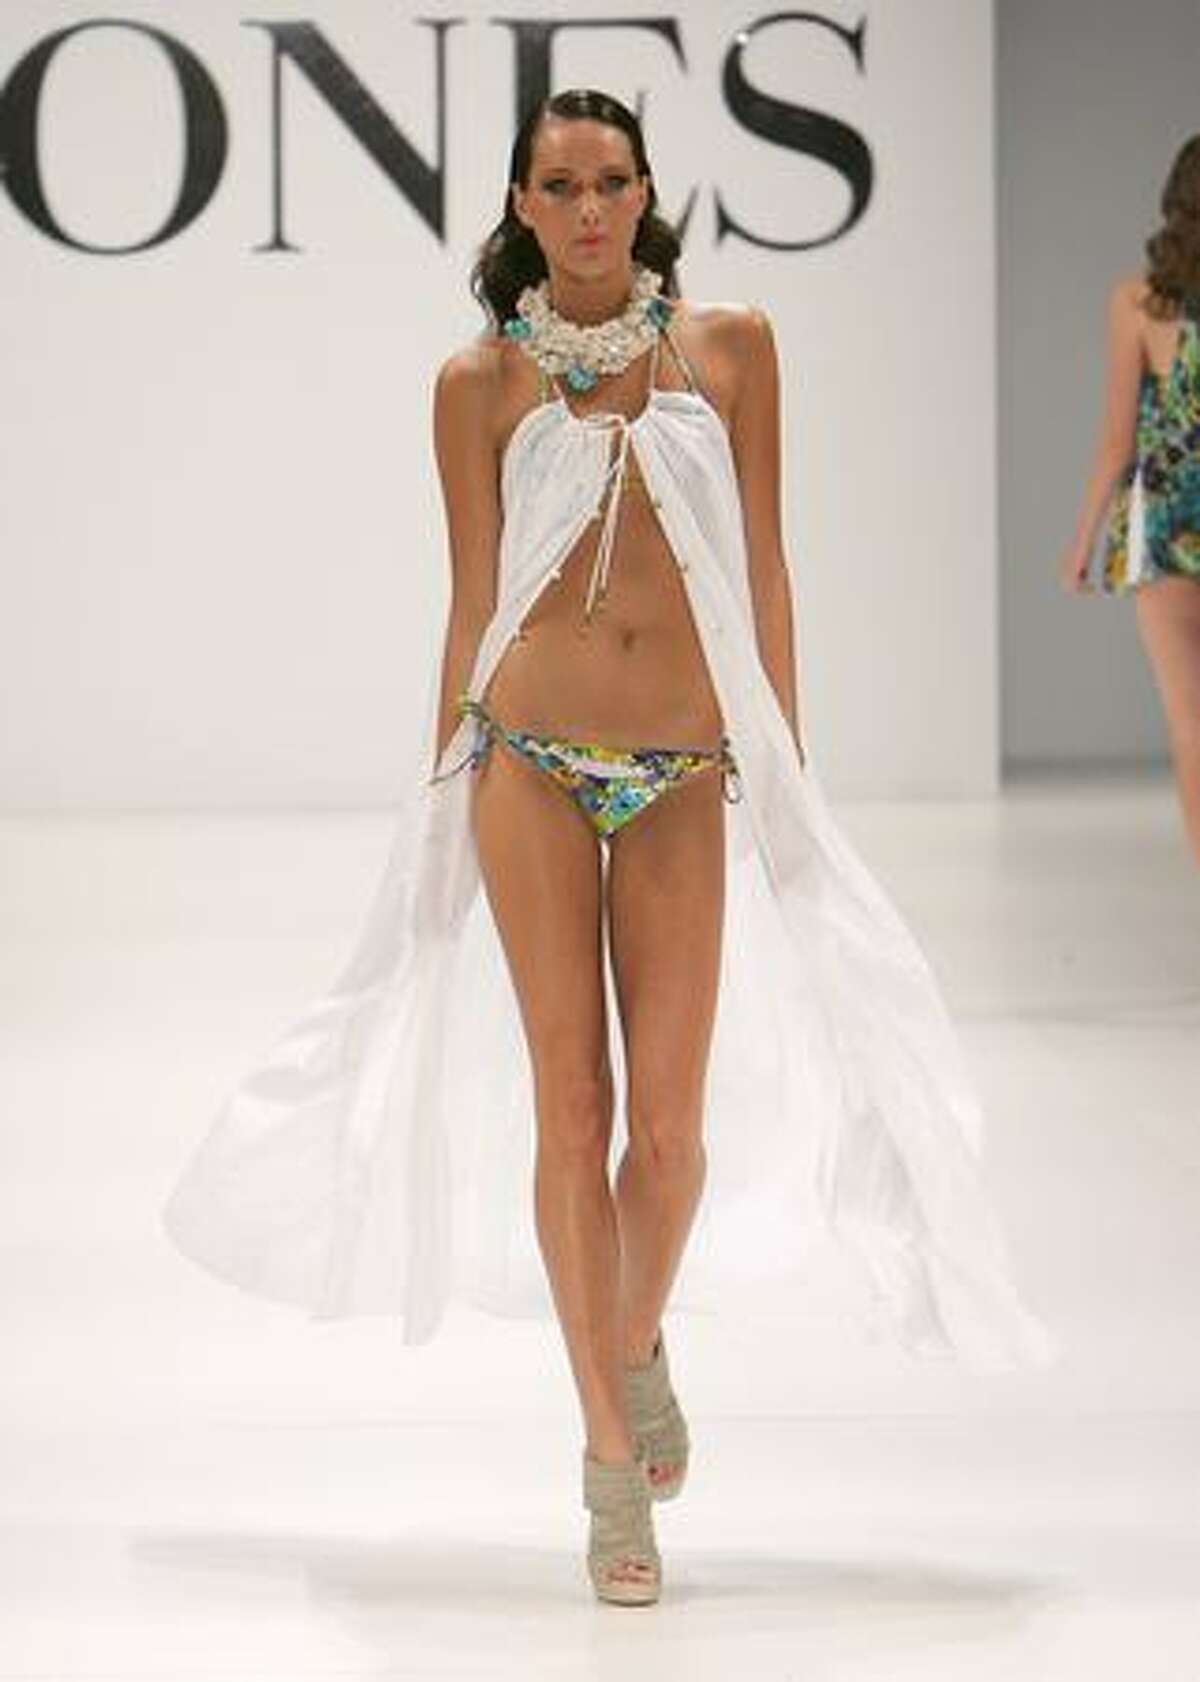 A model showcases designs by Zimmermann on the catwalk at the David Jones Spring/Summer 2009 Collection Launch themed 'A Great Southern Summer 2009' at the Hordern Pavilion, Moore Park in Sydney, Australia.